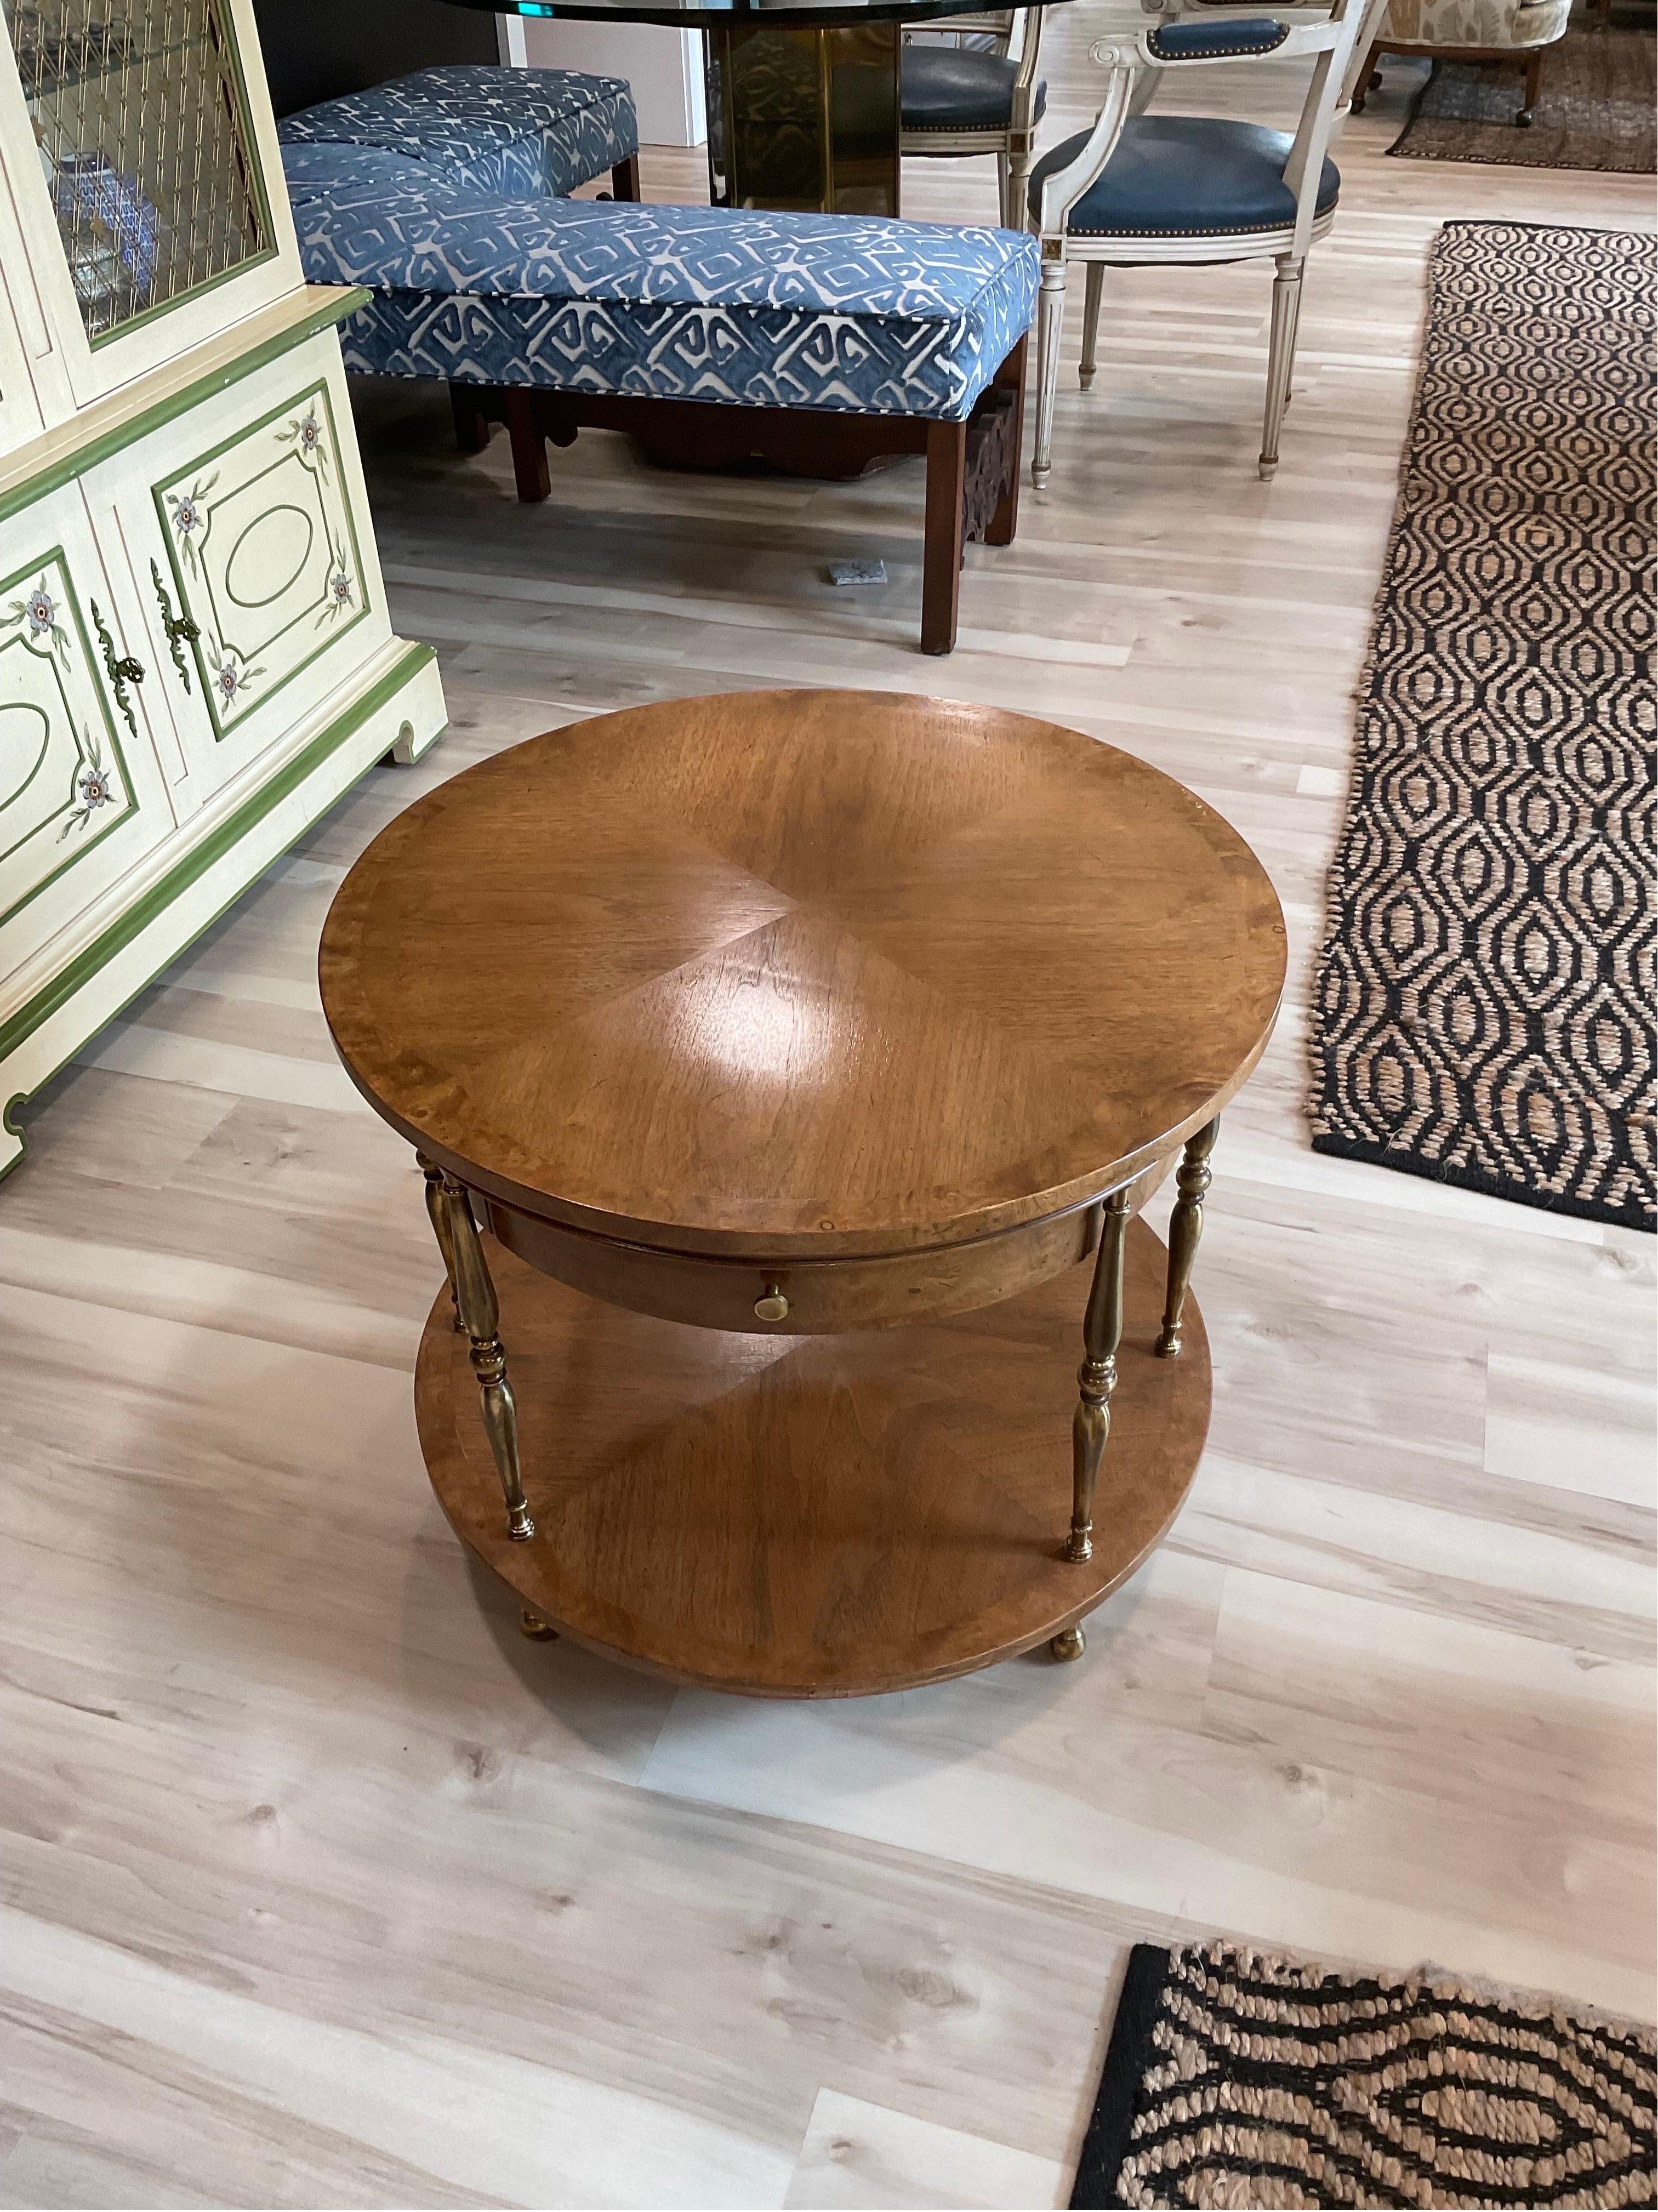 Rare Mastercraft side table in great condition. Round top of Burled wood, signature Mastercraft brass supports separate top and bottom surfaces and one single drawer in the center. Beautiful table. Custom Glass top.

Condition Disclosure:
Please